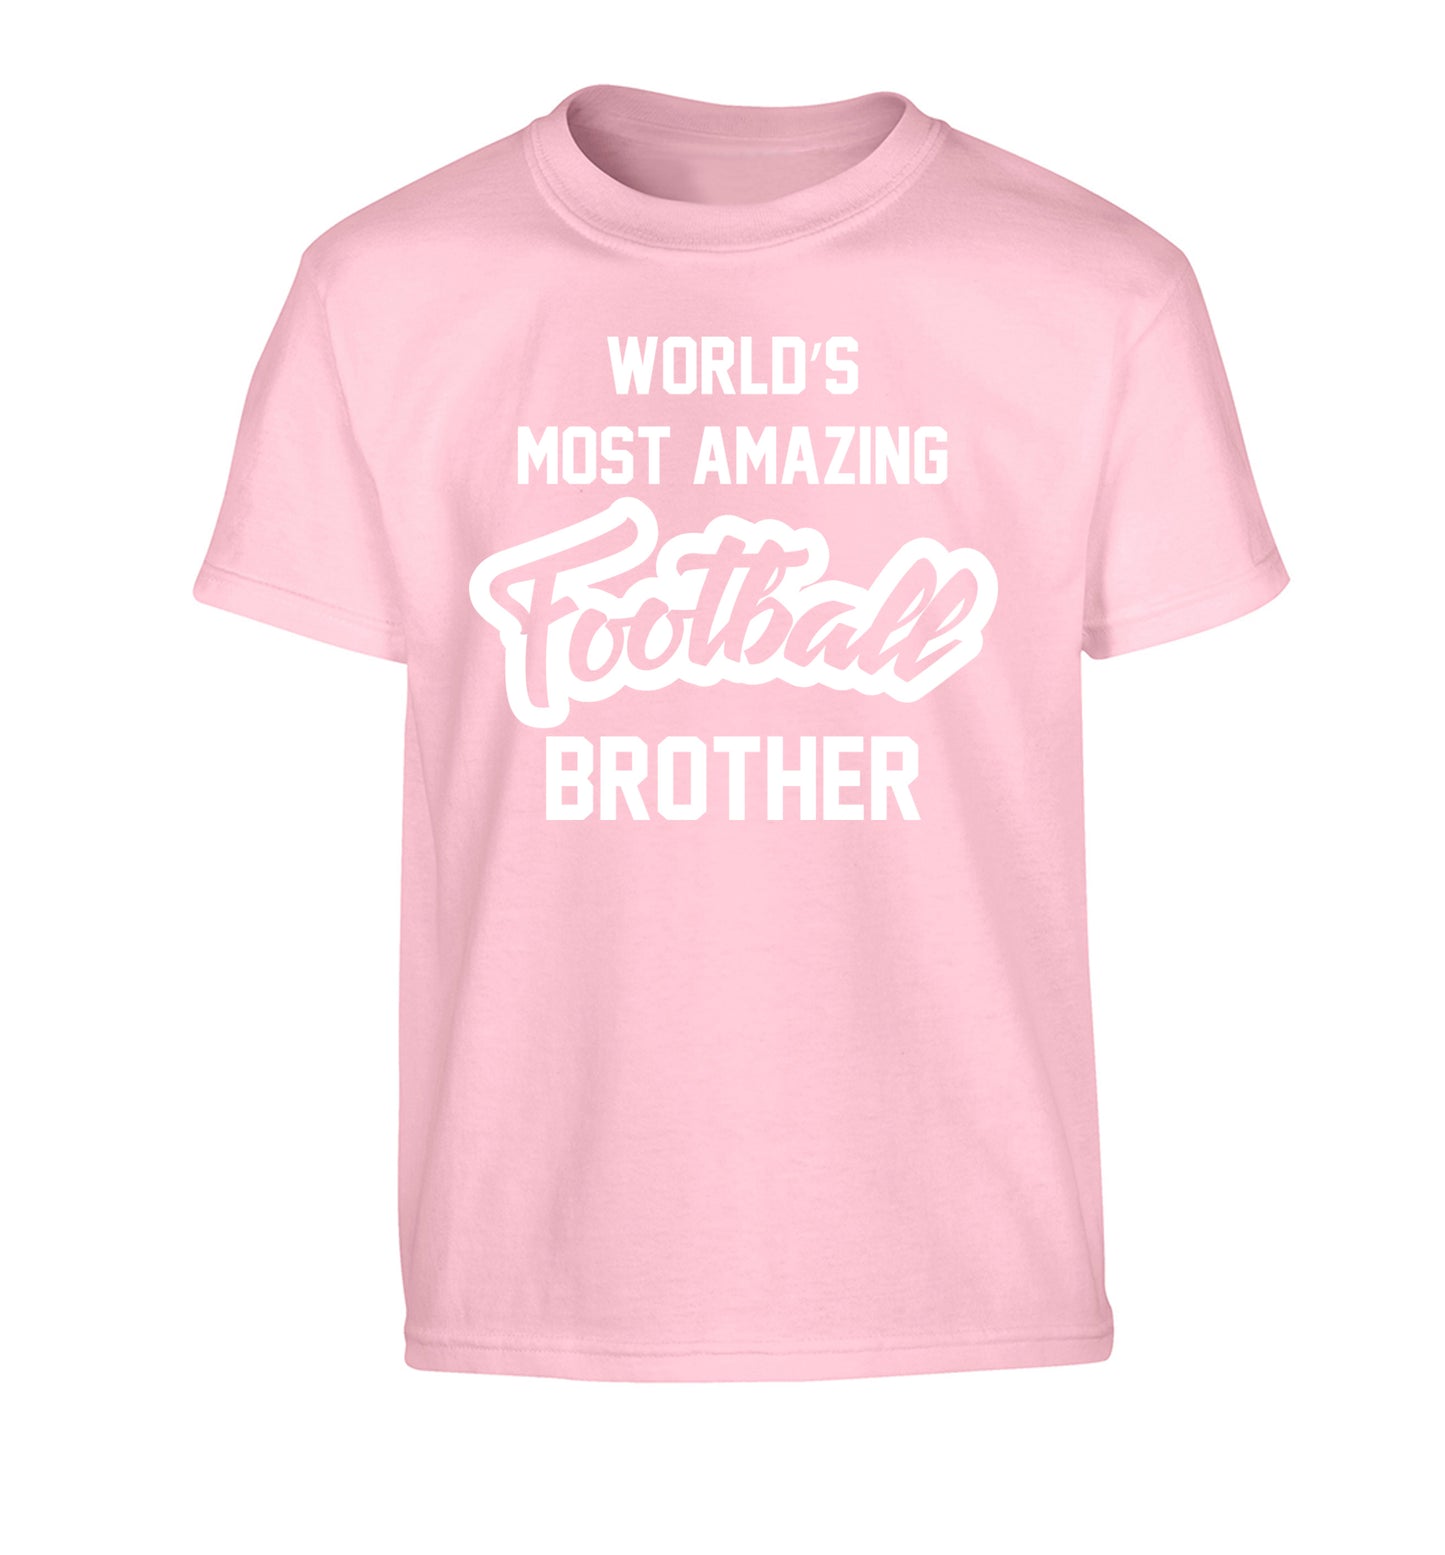 Worlds most amazing football brother Children's light pink Tshirt 12-14 Years